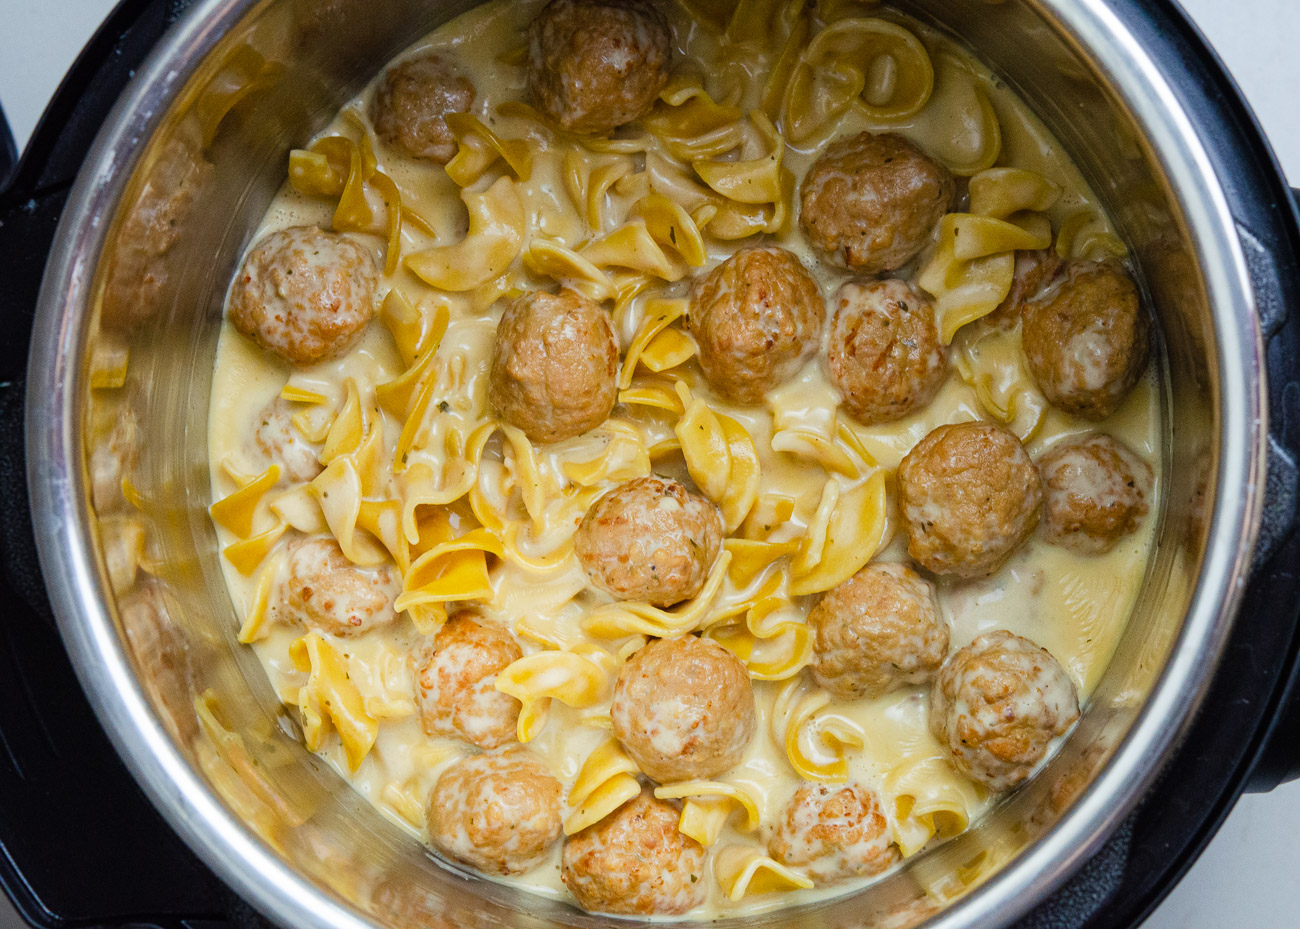 Whisk together cream, corn starch, and sour cream and stir into meatballs. Turn Instant Pot to saute and cook until sauce has thickened.